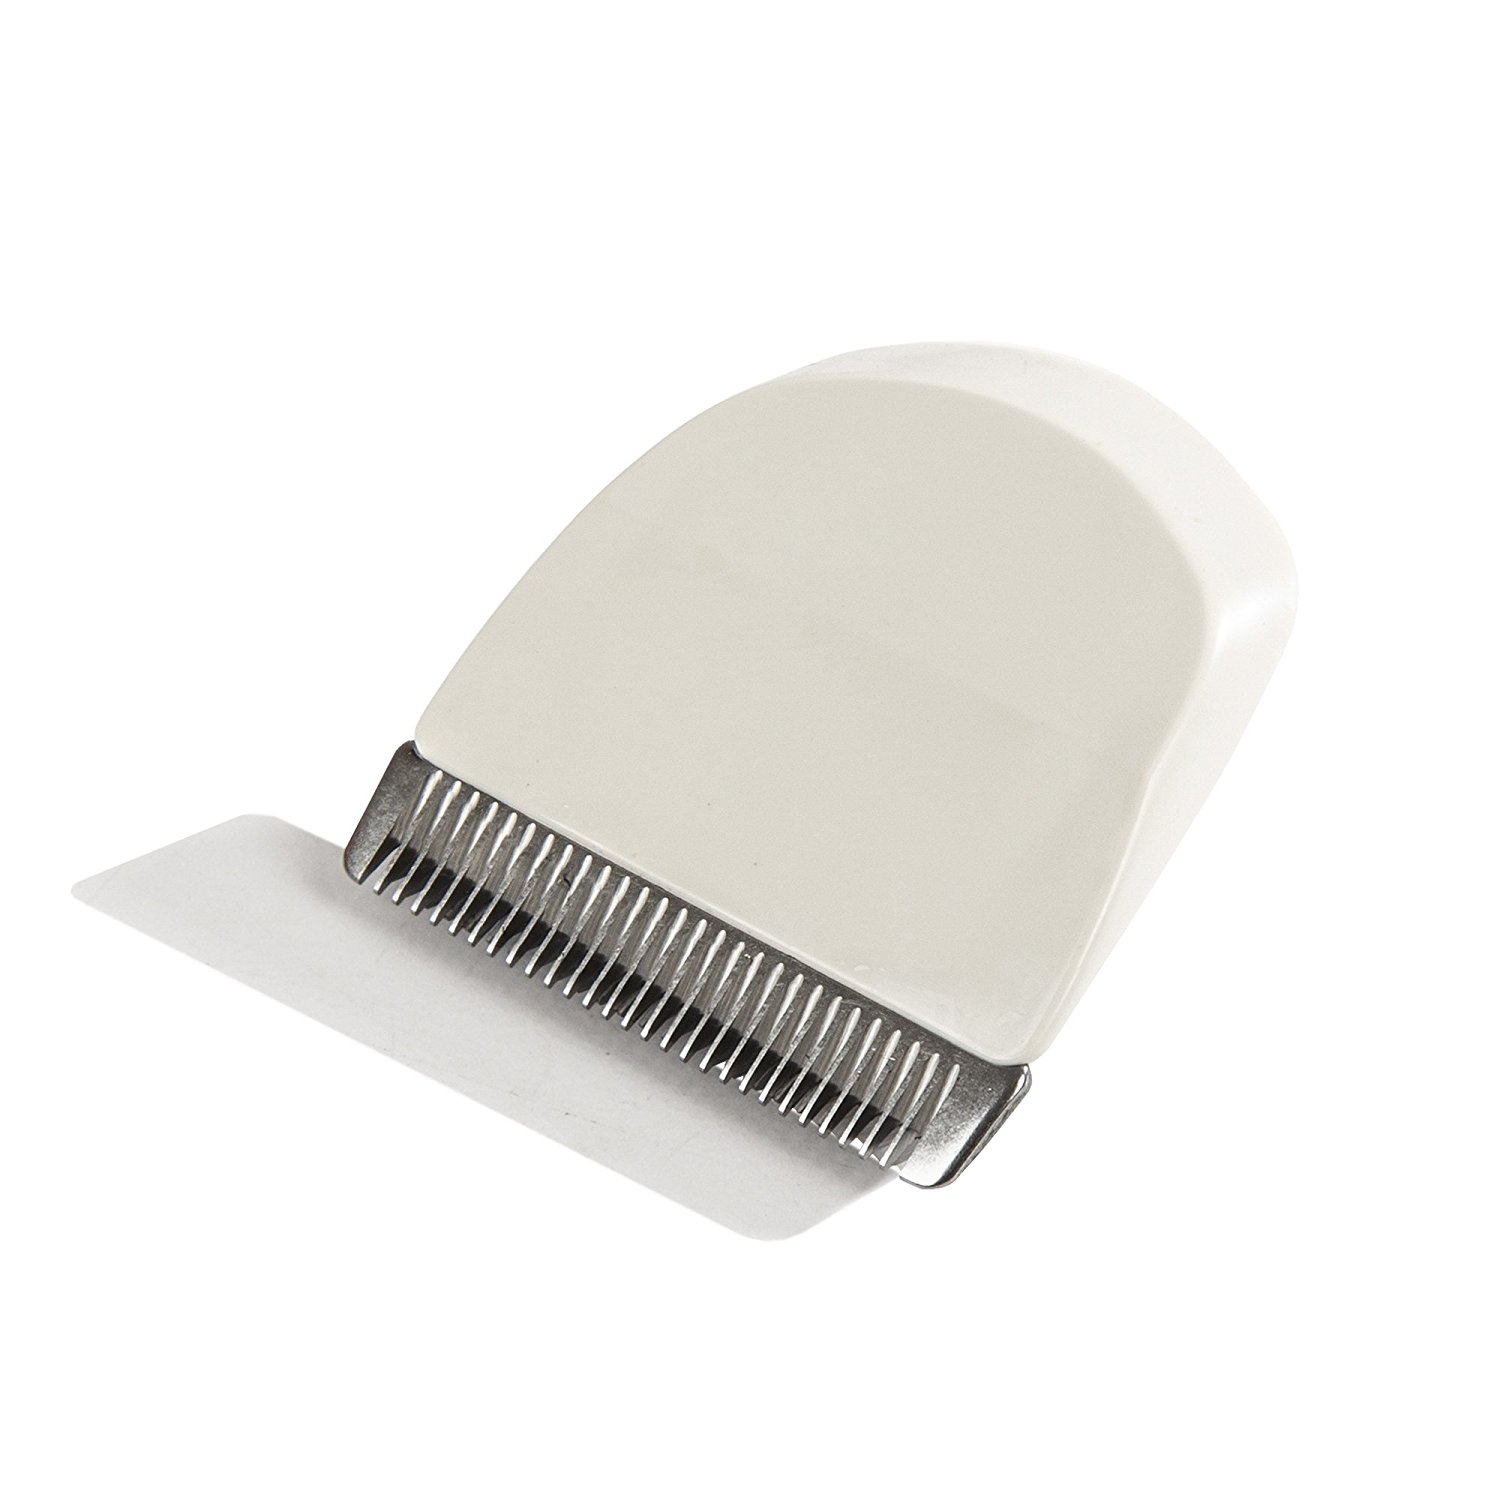 Wahl Peanut Replacement Blade 2068-300 - white